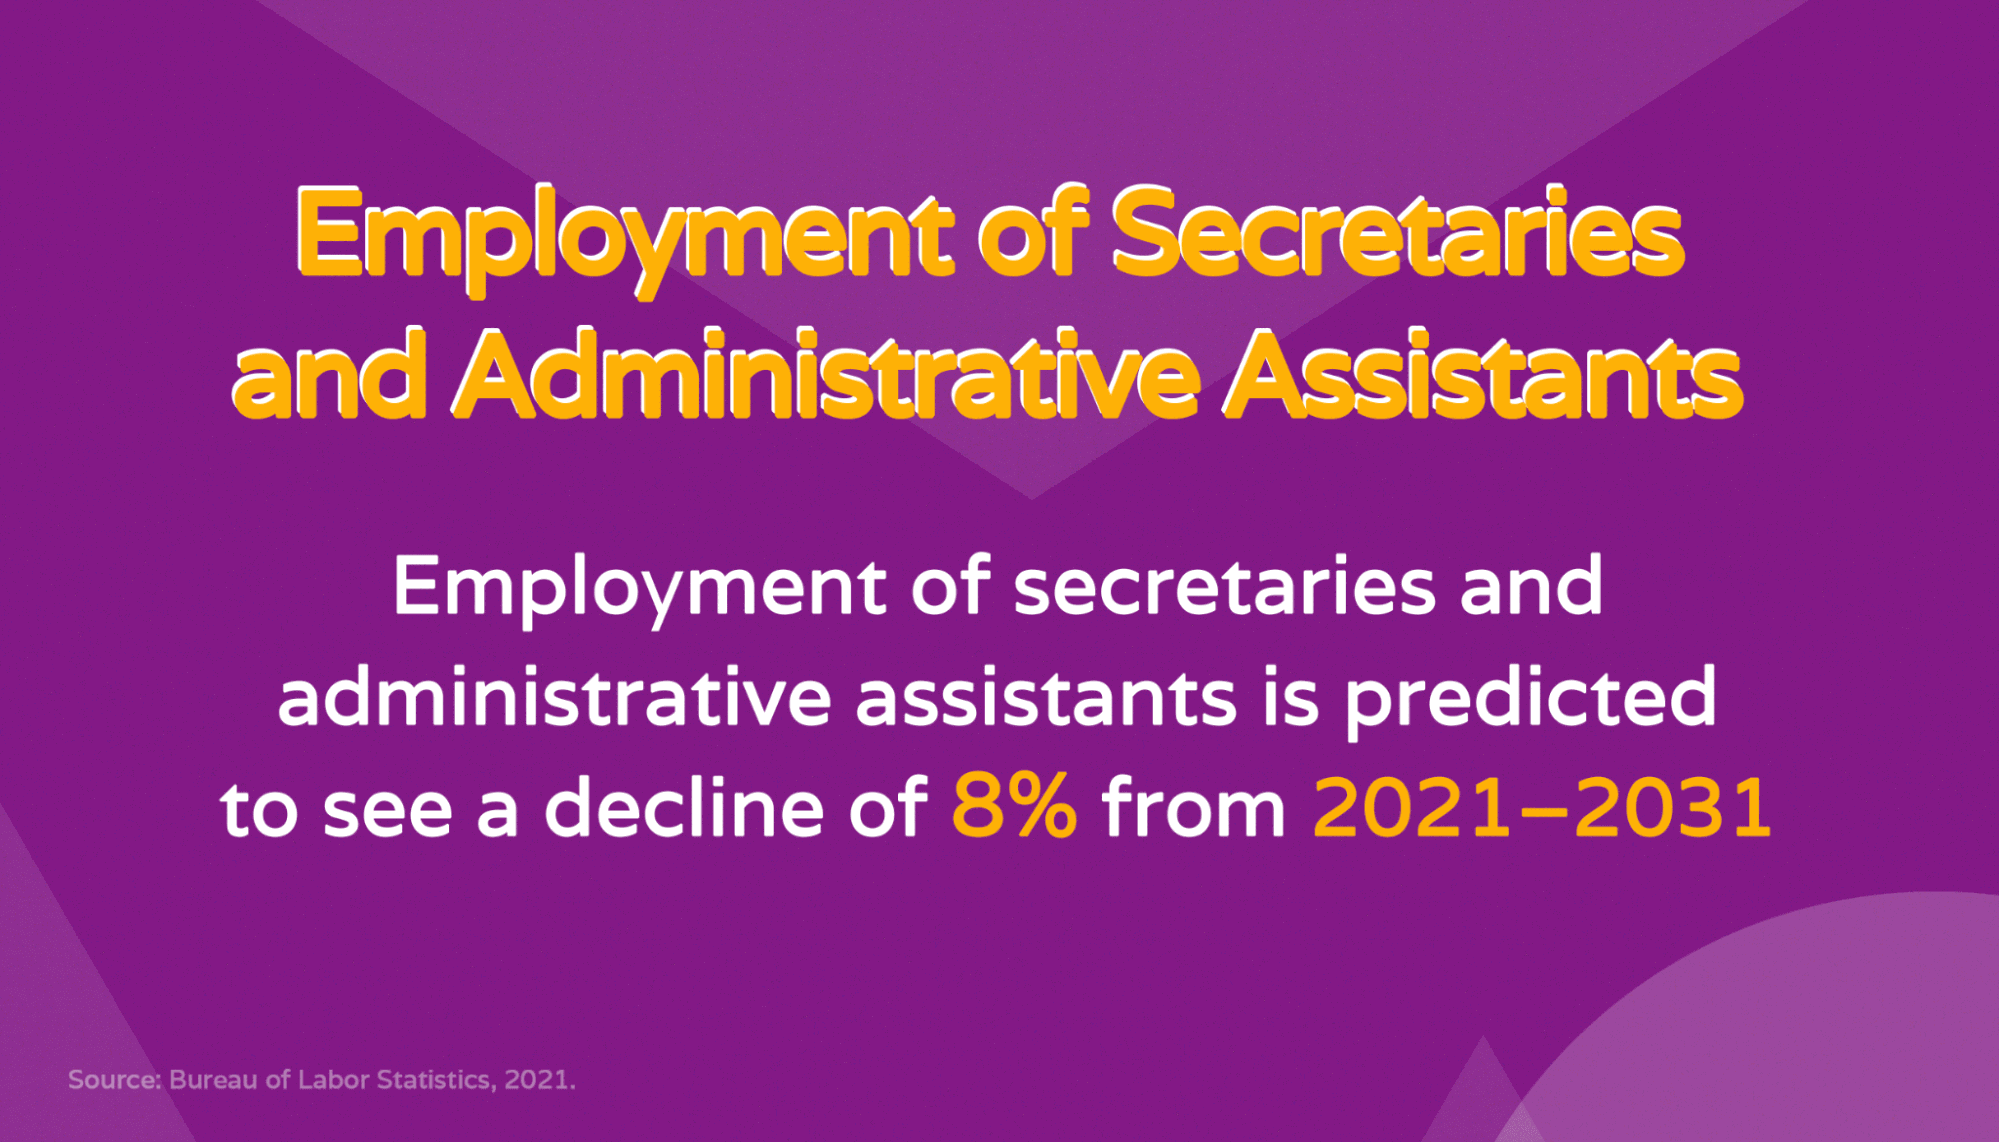 image showing the decline in employment of administrative assistants